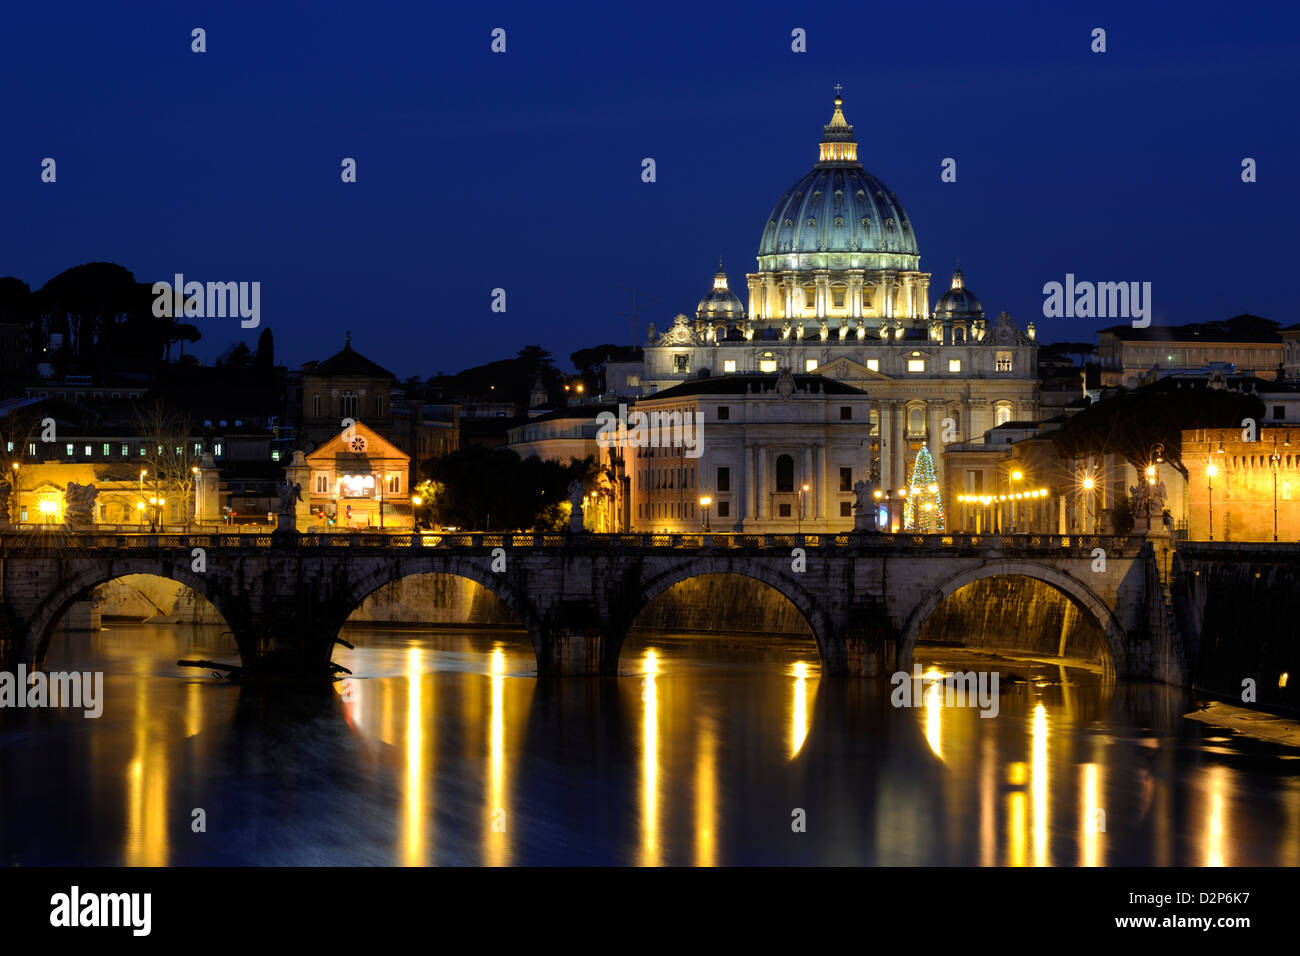 Italy, Rome, Tiber river, Sant'Angelo bridge and St Peter's basilica at night Stock Photo